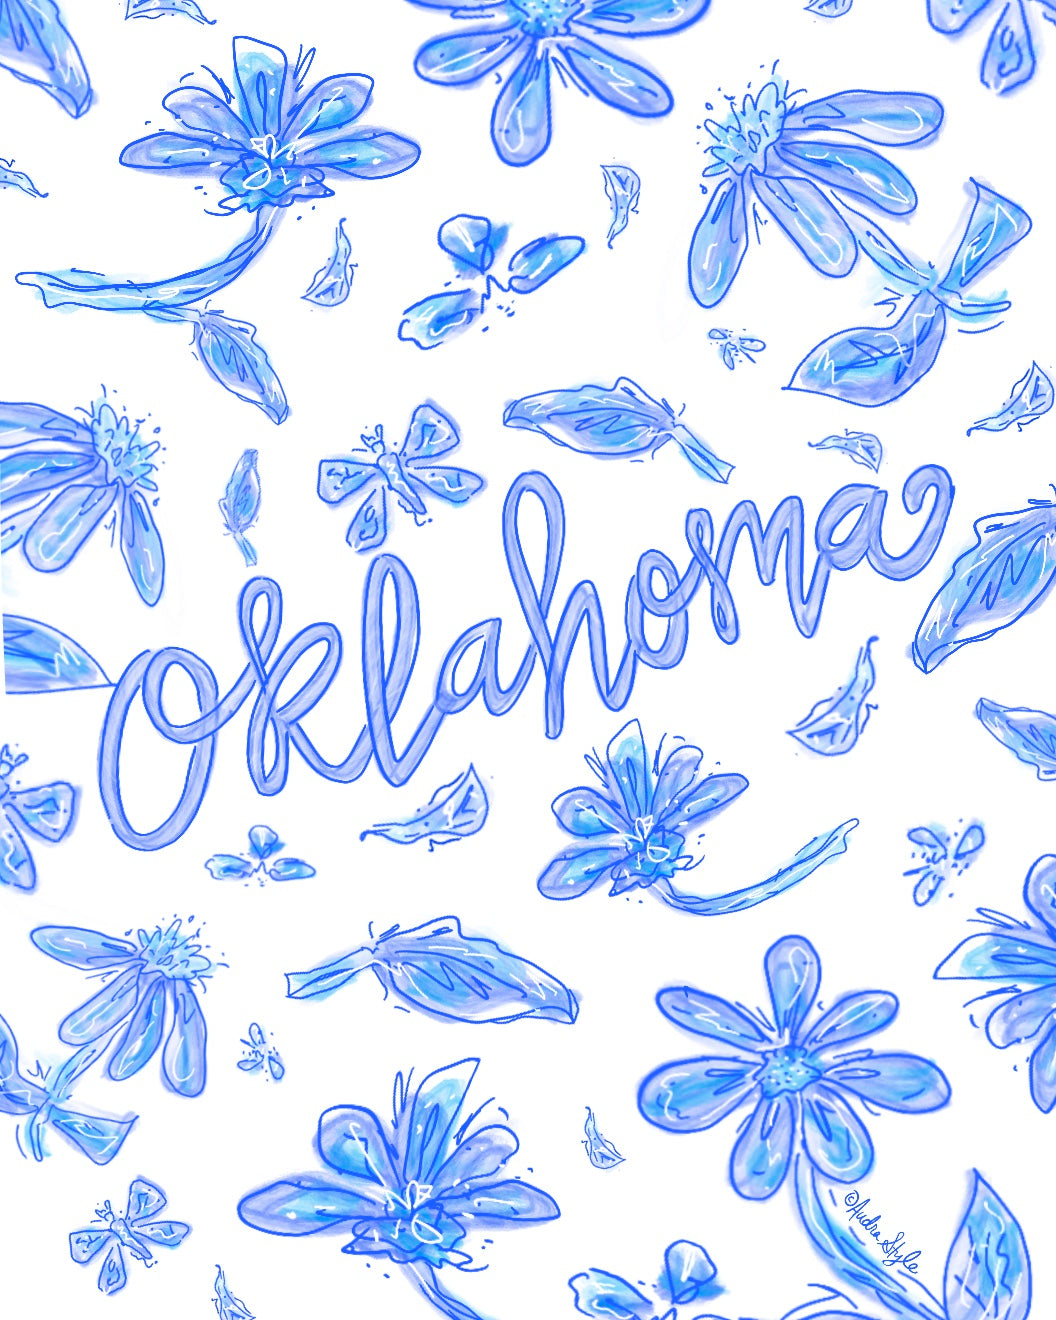 Blue and White Oklahoma Floral Reproduction Print